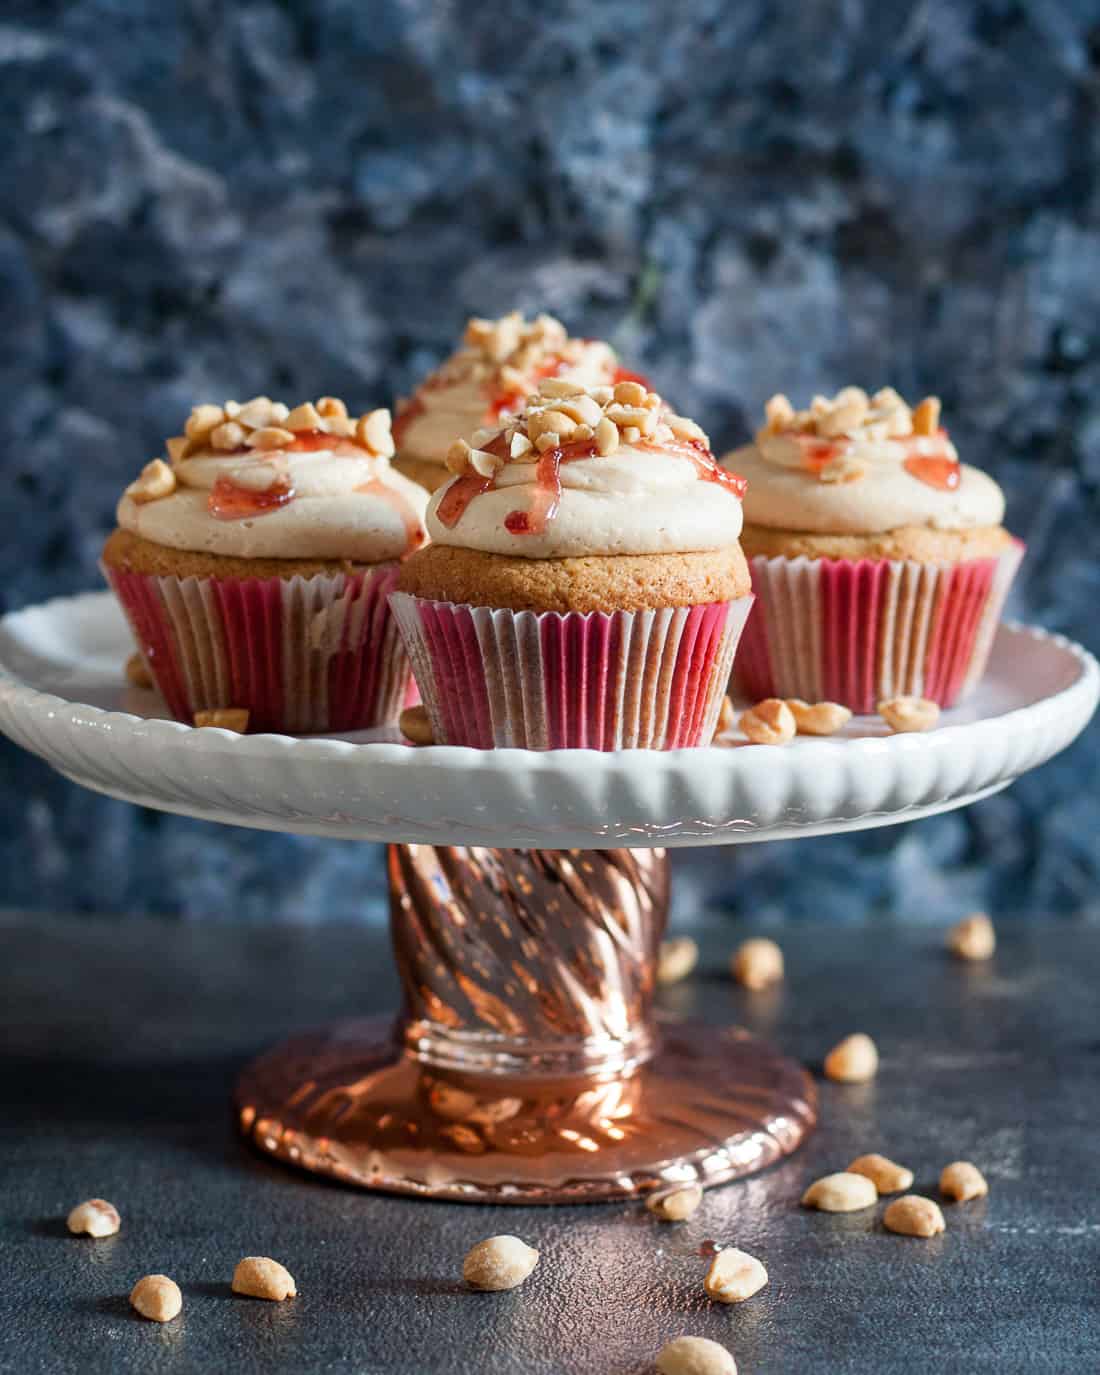 A classic sandwich in dessert form, you won't believe the inspiration story behind these delicious peanut butter and jelly cupcakes. * Recipe on GoodieGodmother.com